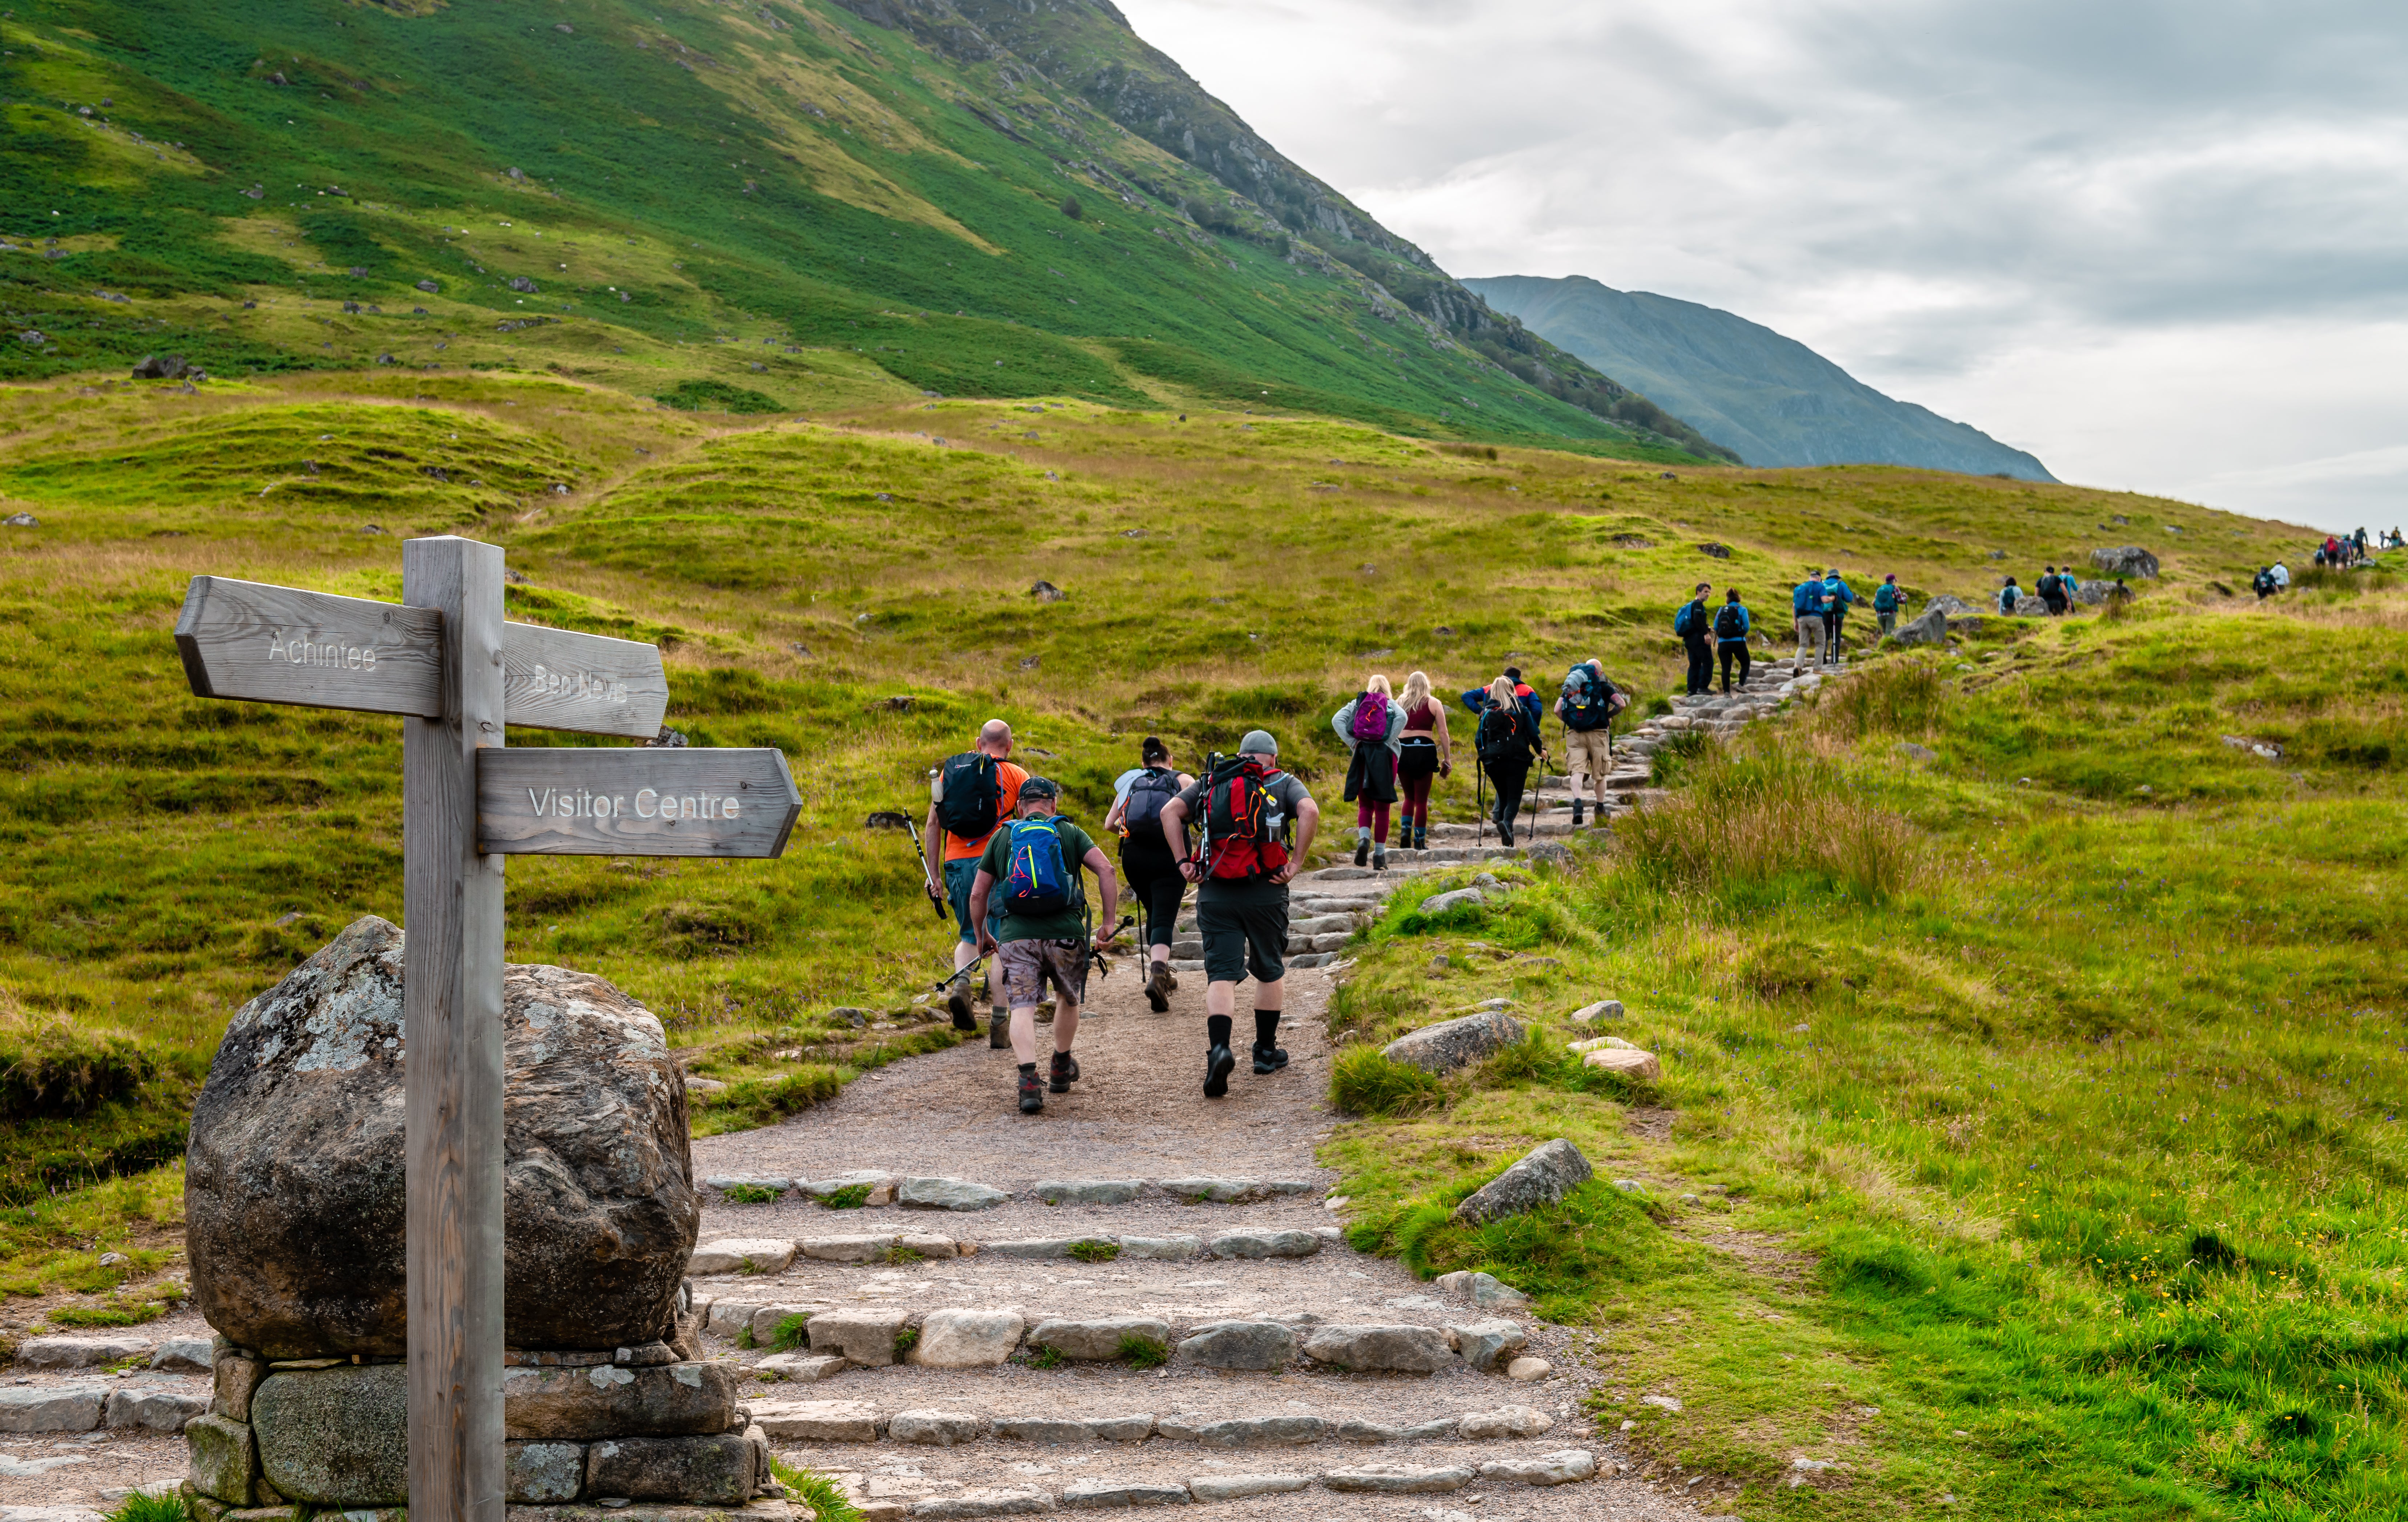 Snowdon has become increasingly popular for walkers, raising concerns about overuse